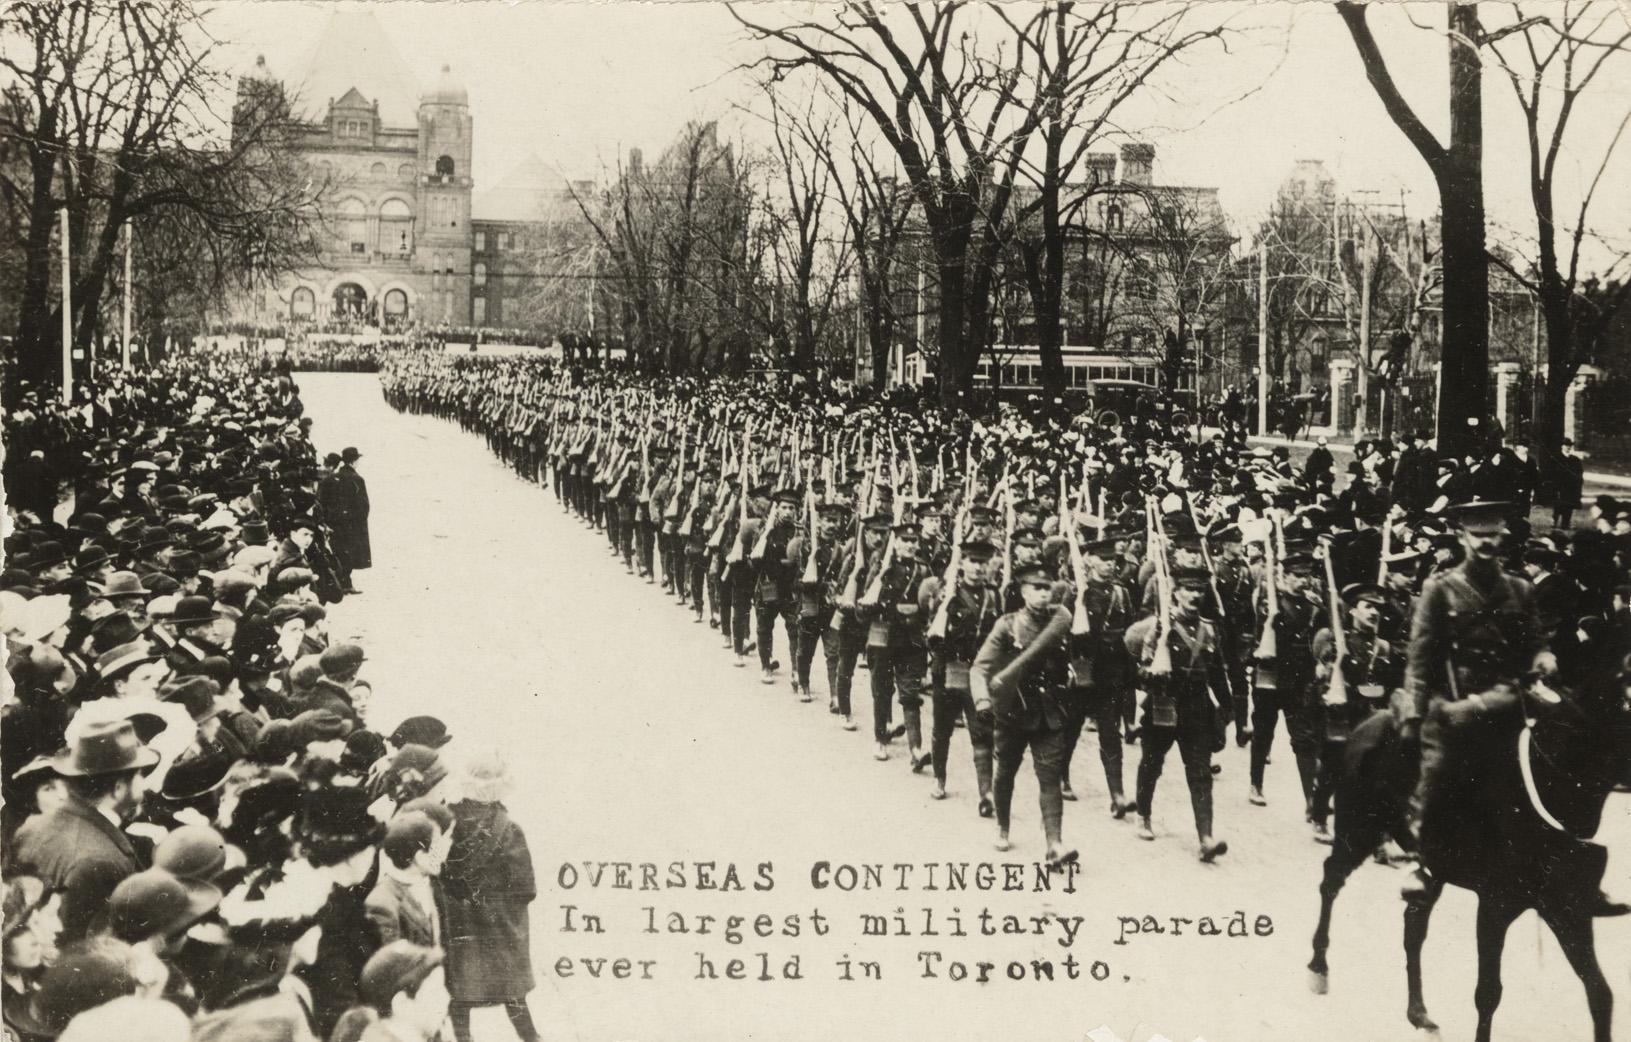 Overseas contingent in  largest military parade ever held in Toronto, 1915